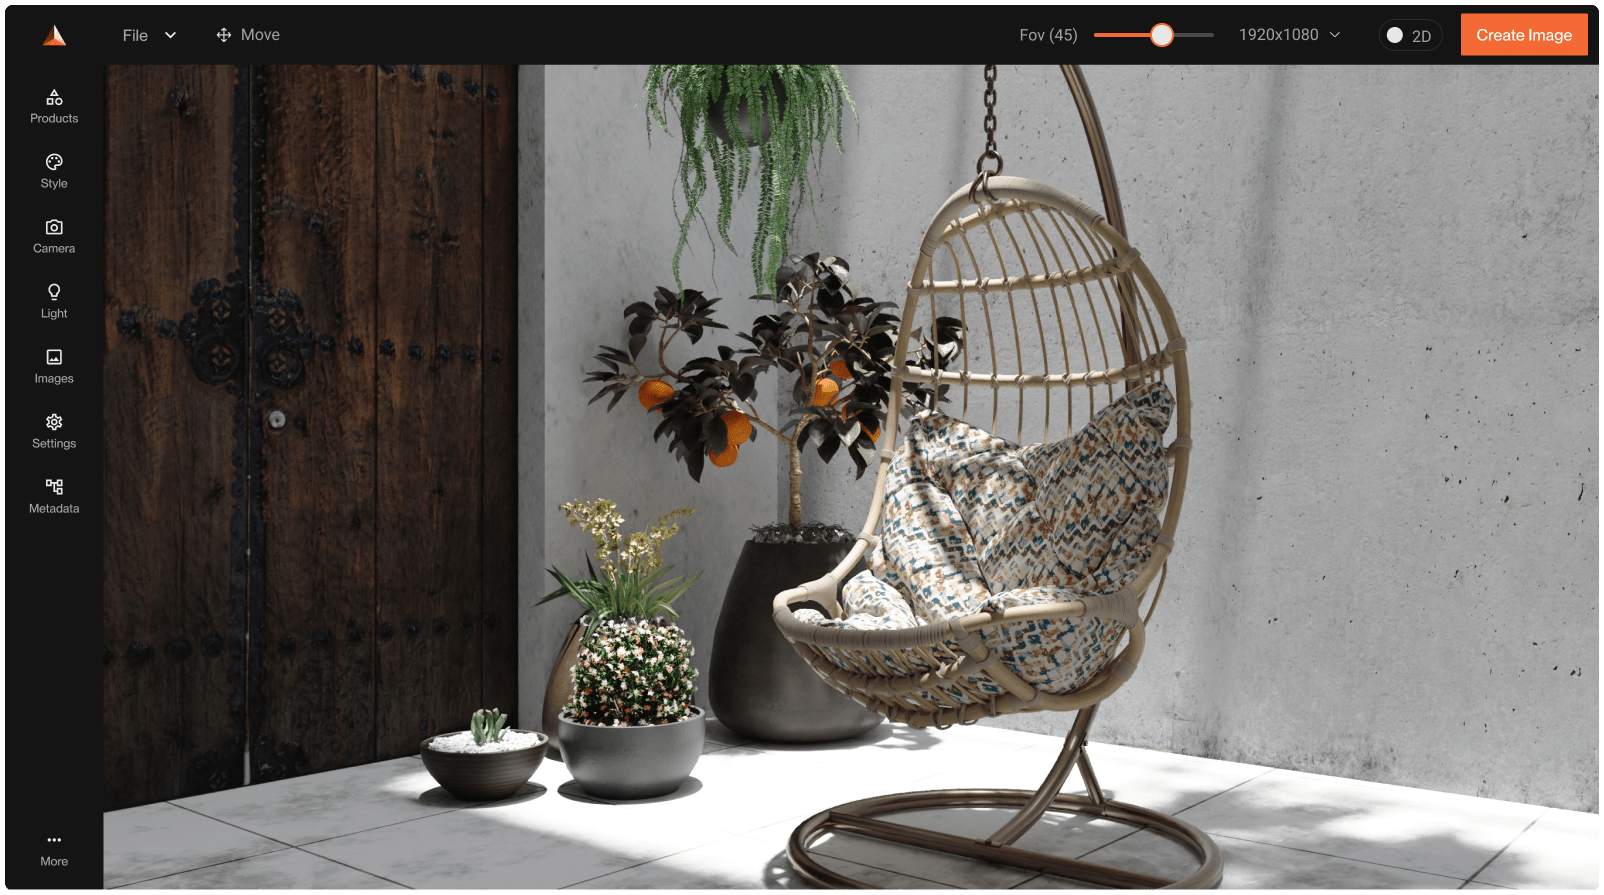 Vignette of outdoor wicker egg chair with cushions made with imagine.io 3D curator 